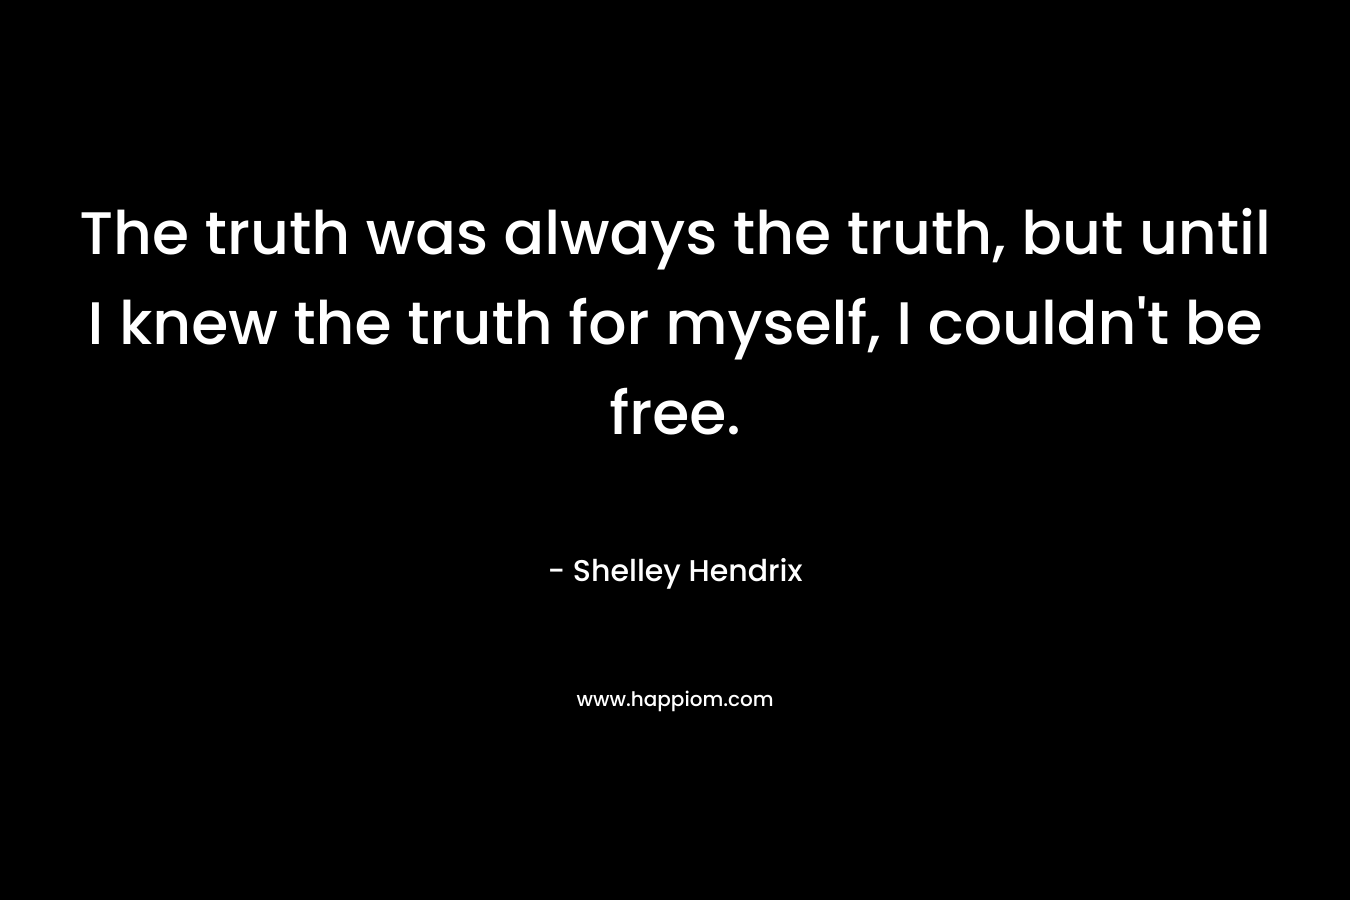 The truth was always the truth, but until I knew the truth for myself, I couldn't be free.